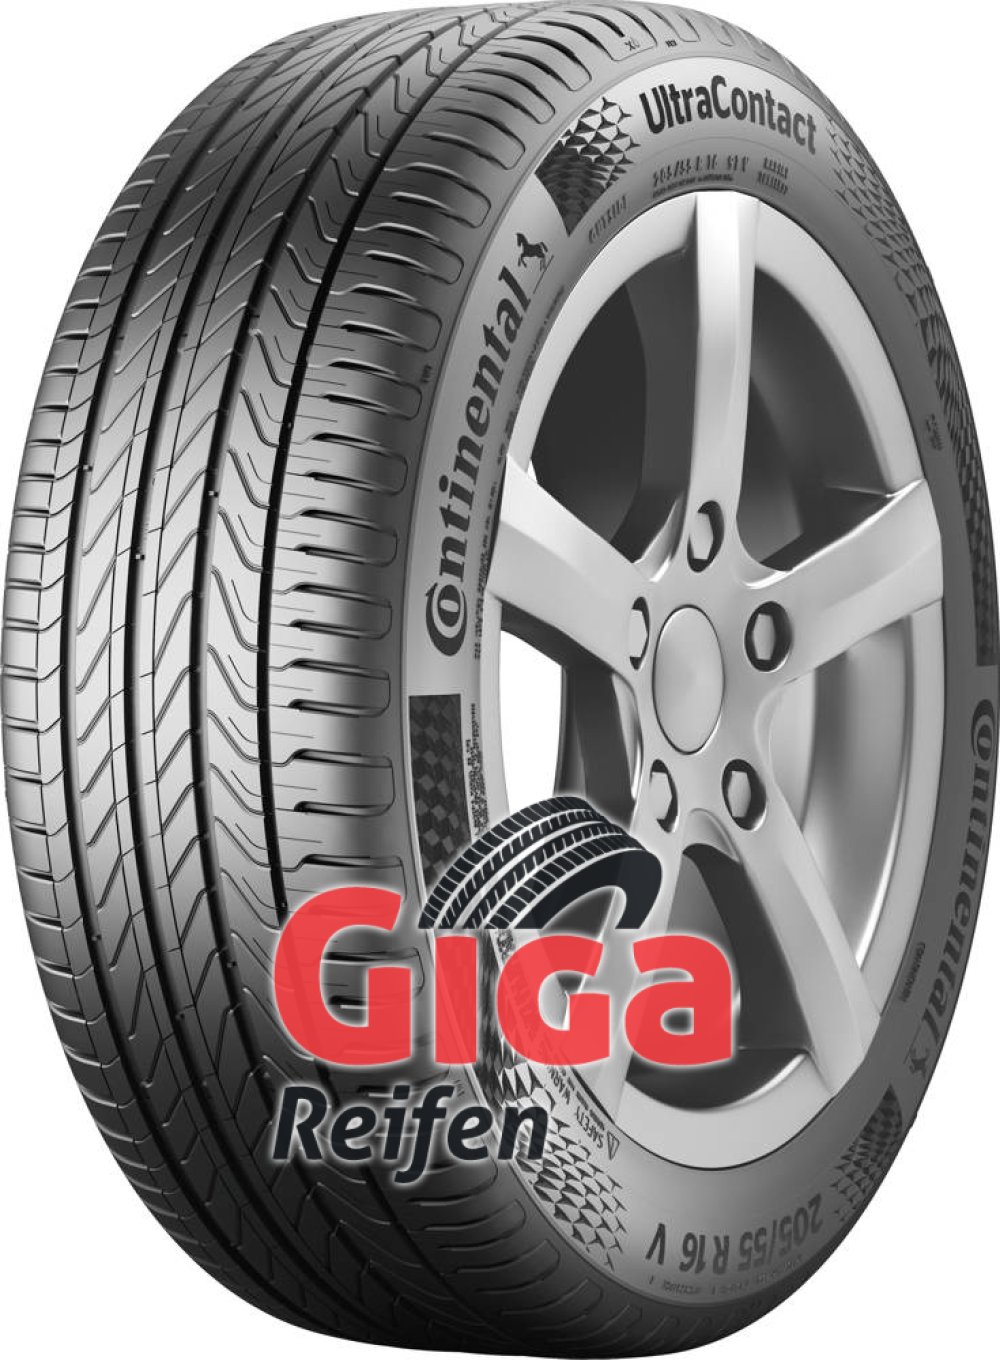 Continental UltraContact ( 175/65 R14 82T EVc ) von Continental